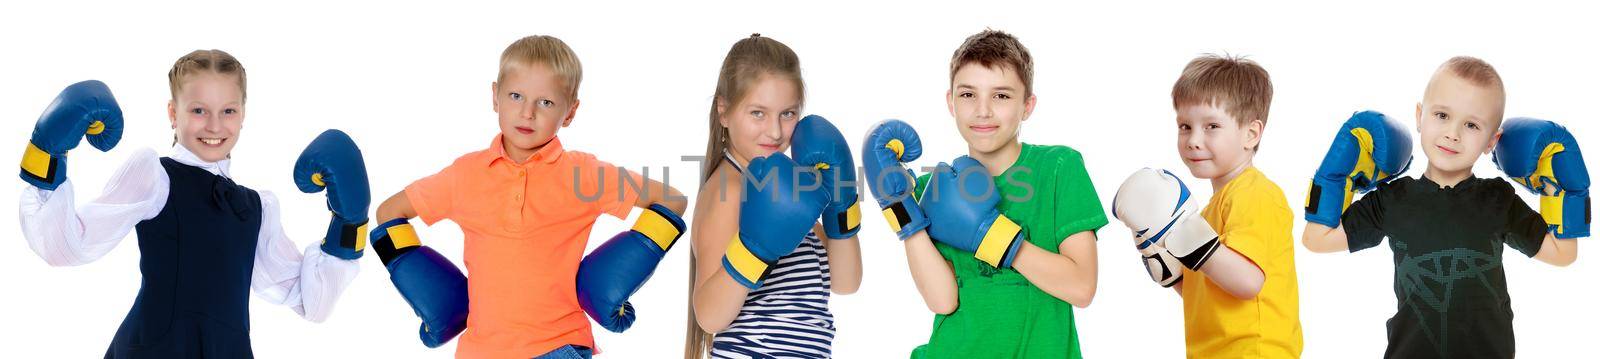 A company of happy children in boxing gloves. Concept of sport, fitness, Happy childhood. Isolated on white background.